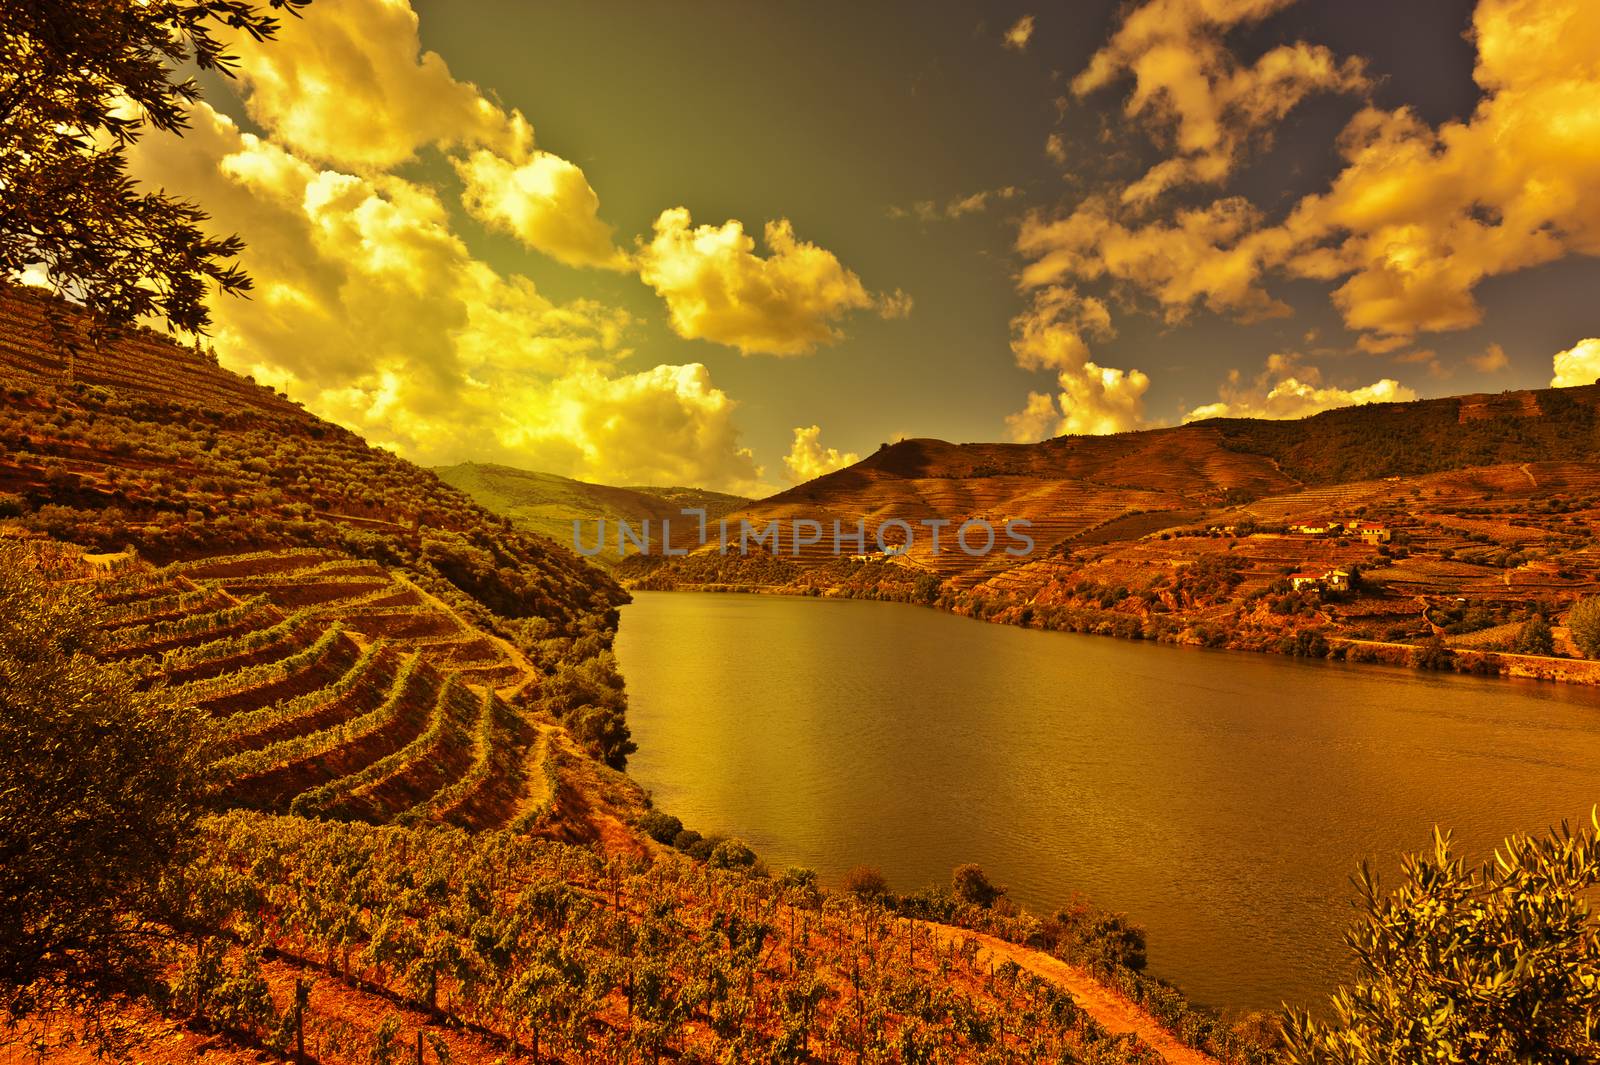 Vineyards in the Valley of the River Douro, Portugal, at Sunset